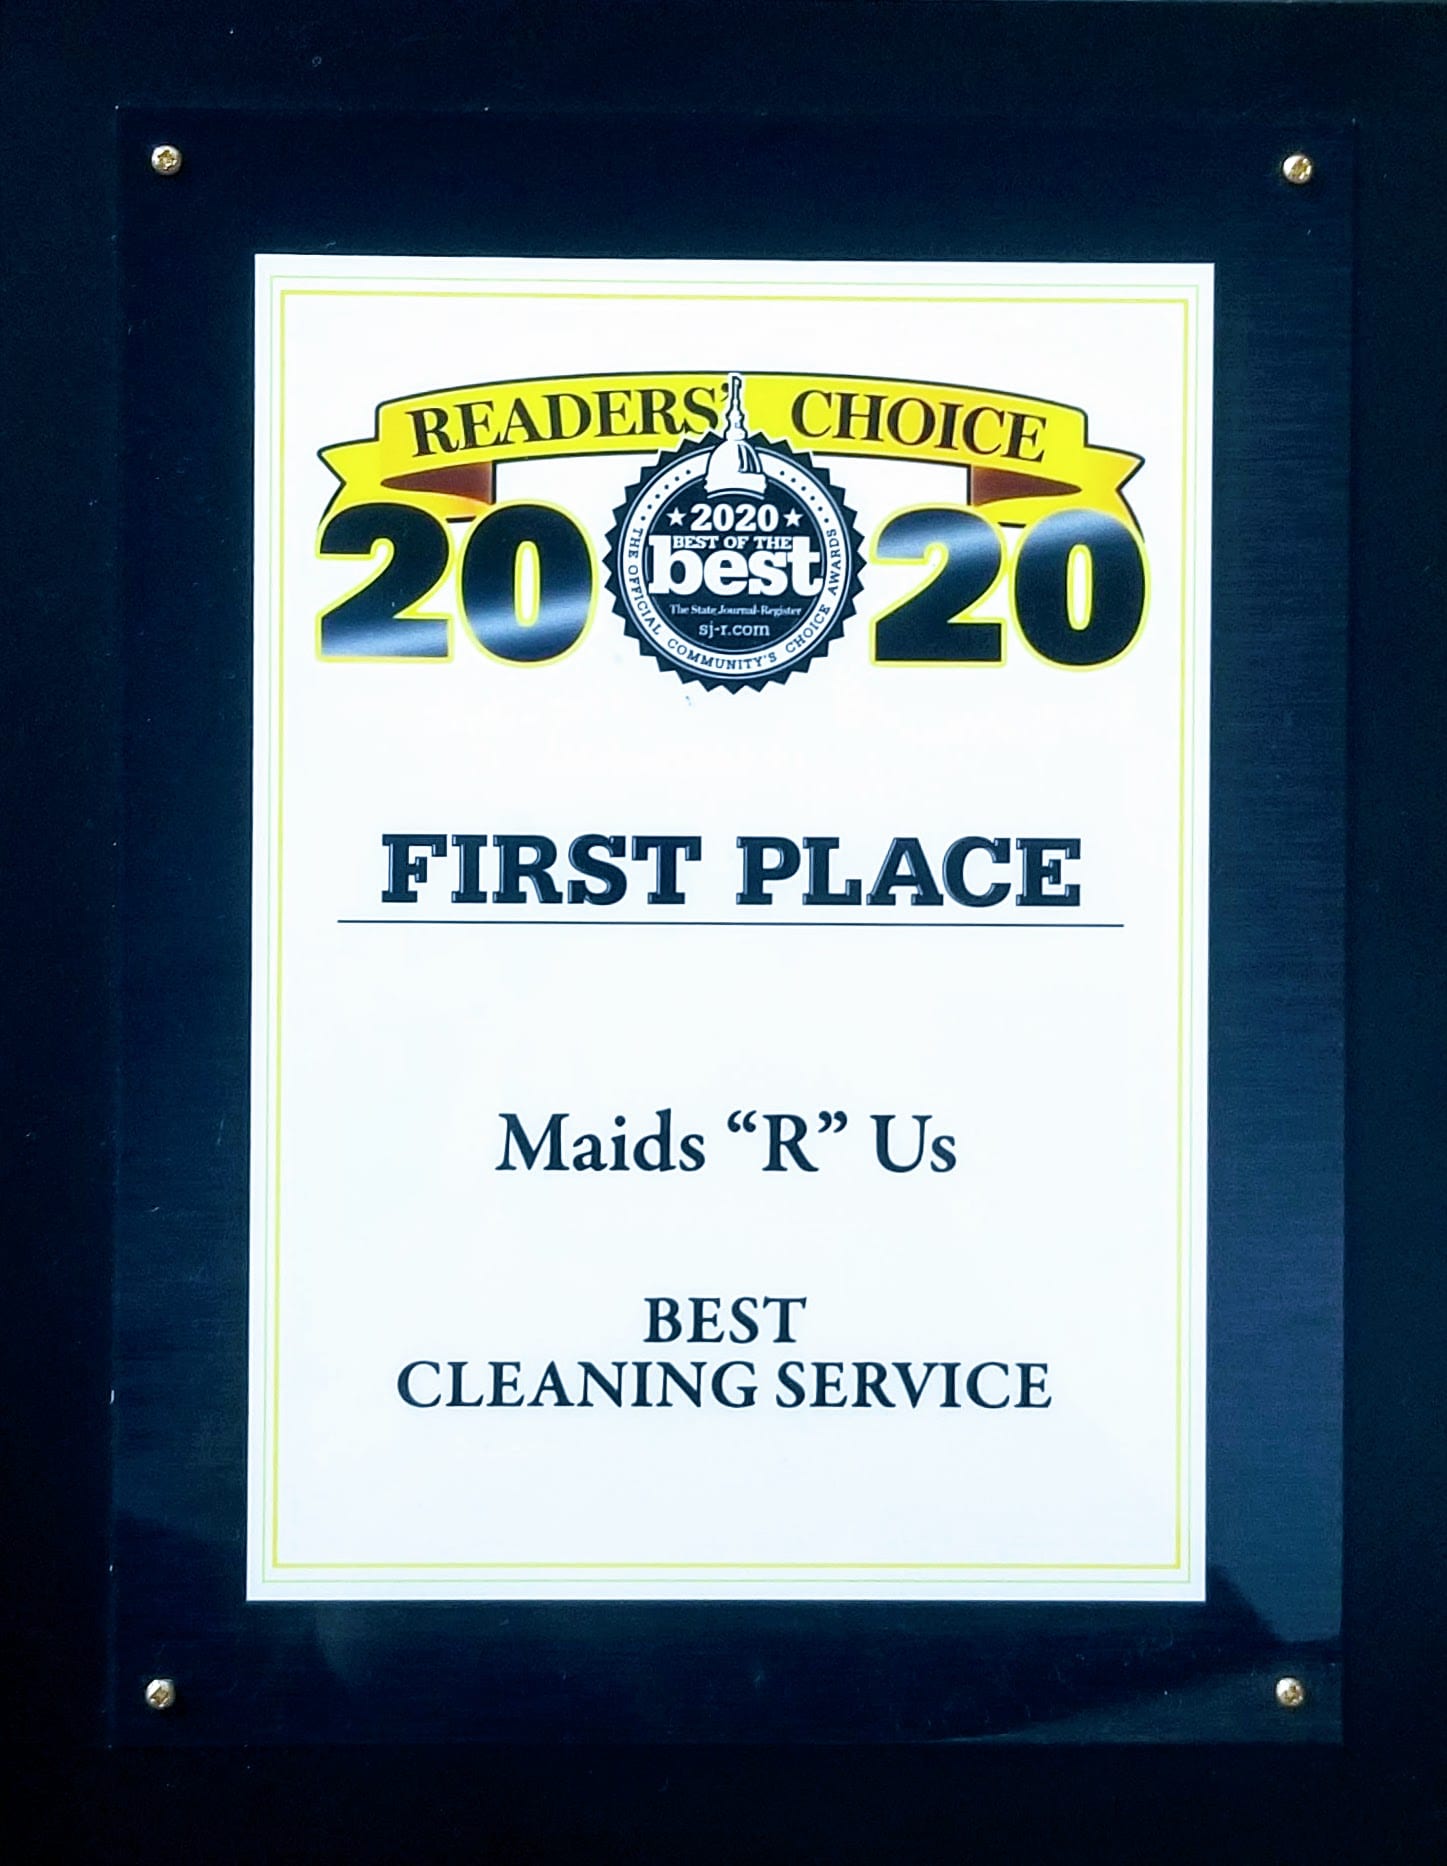 best cleaning services of the year 2020 award for Maids "R" Us Springfield il